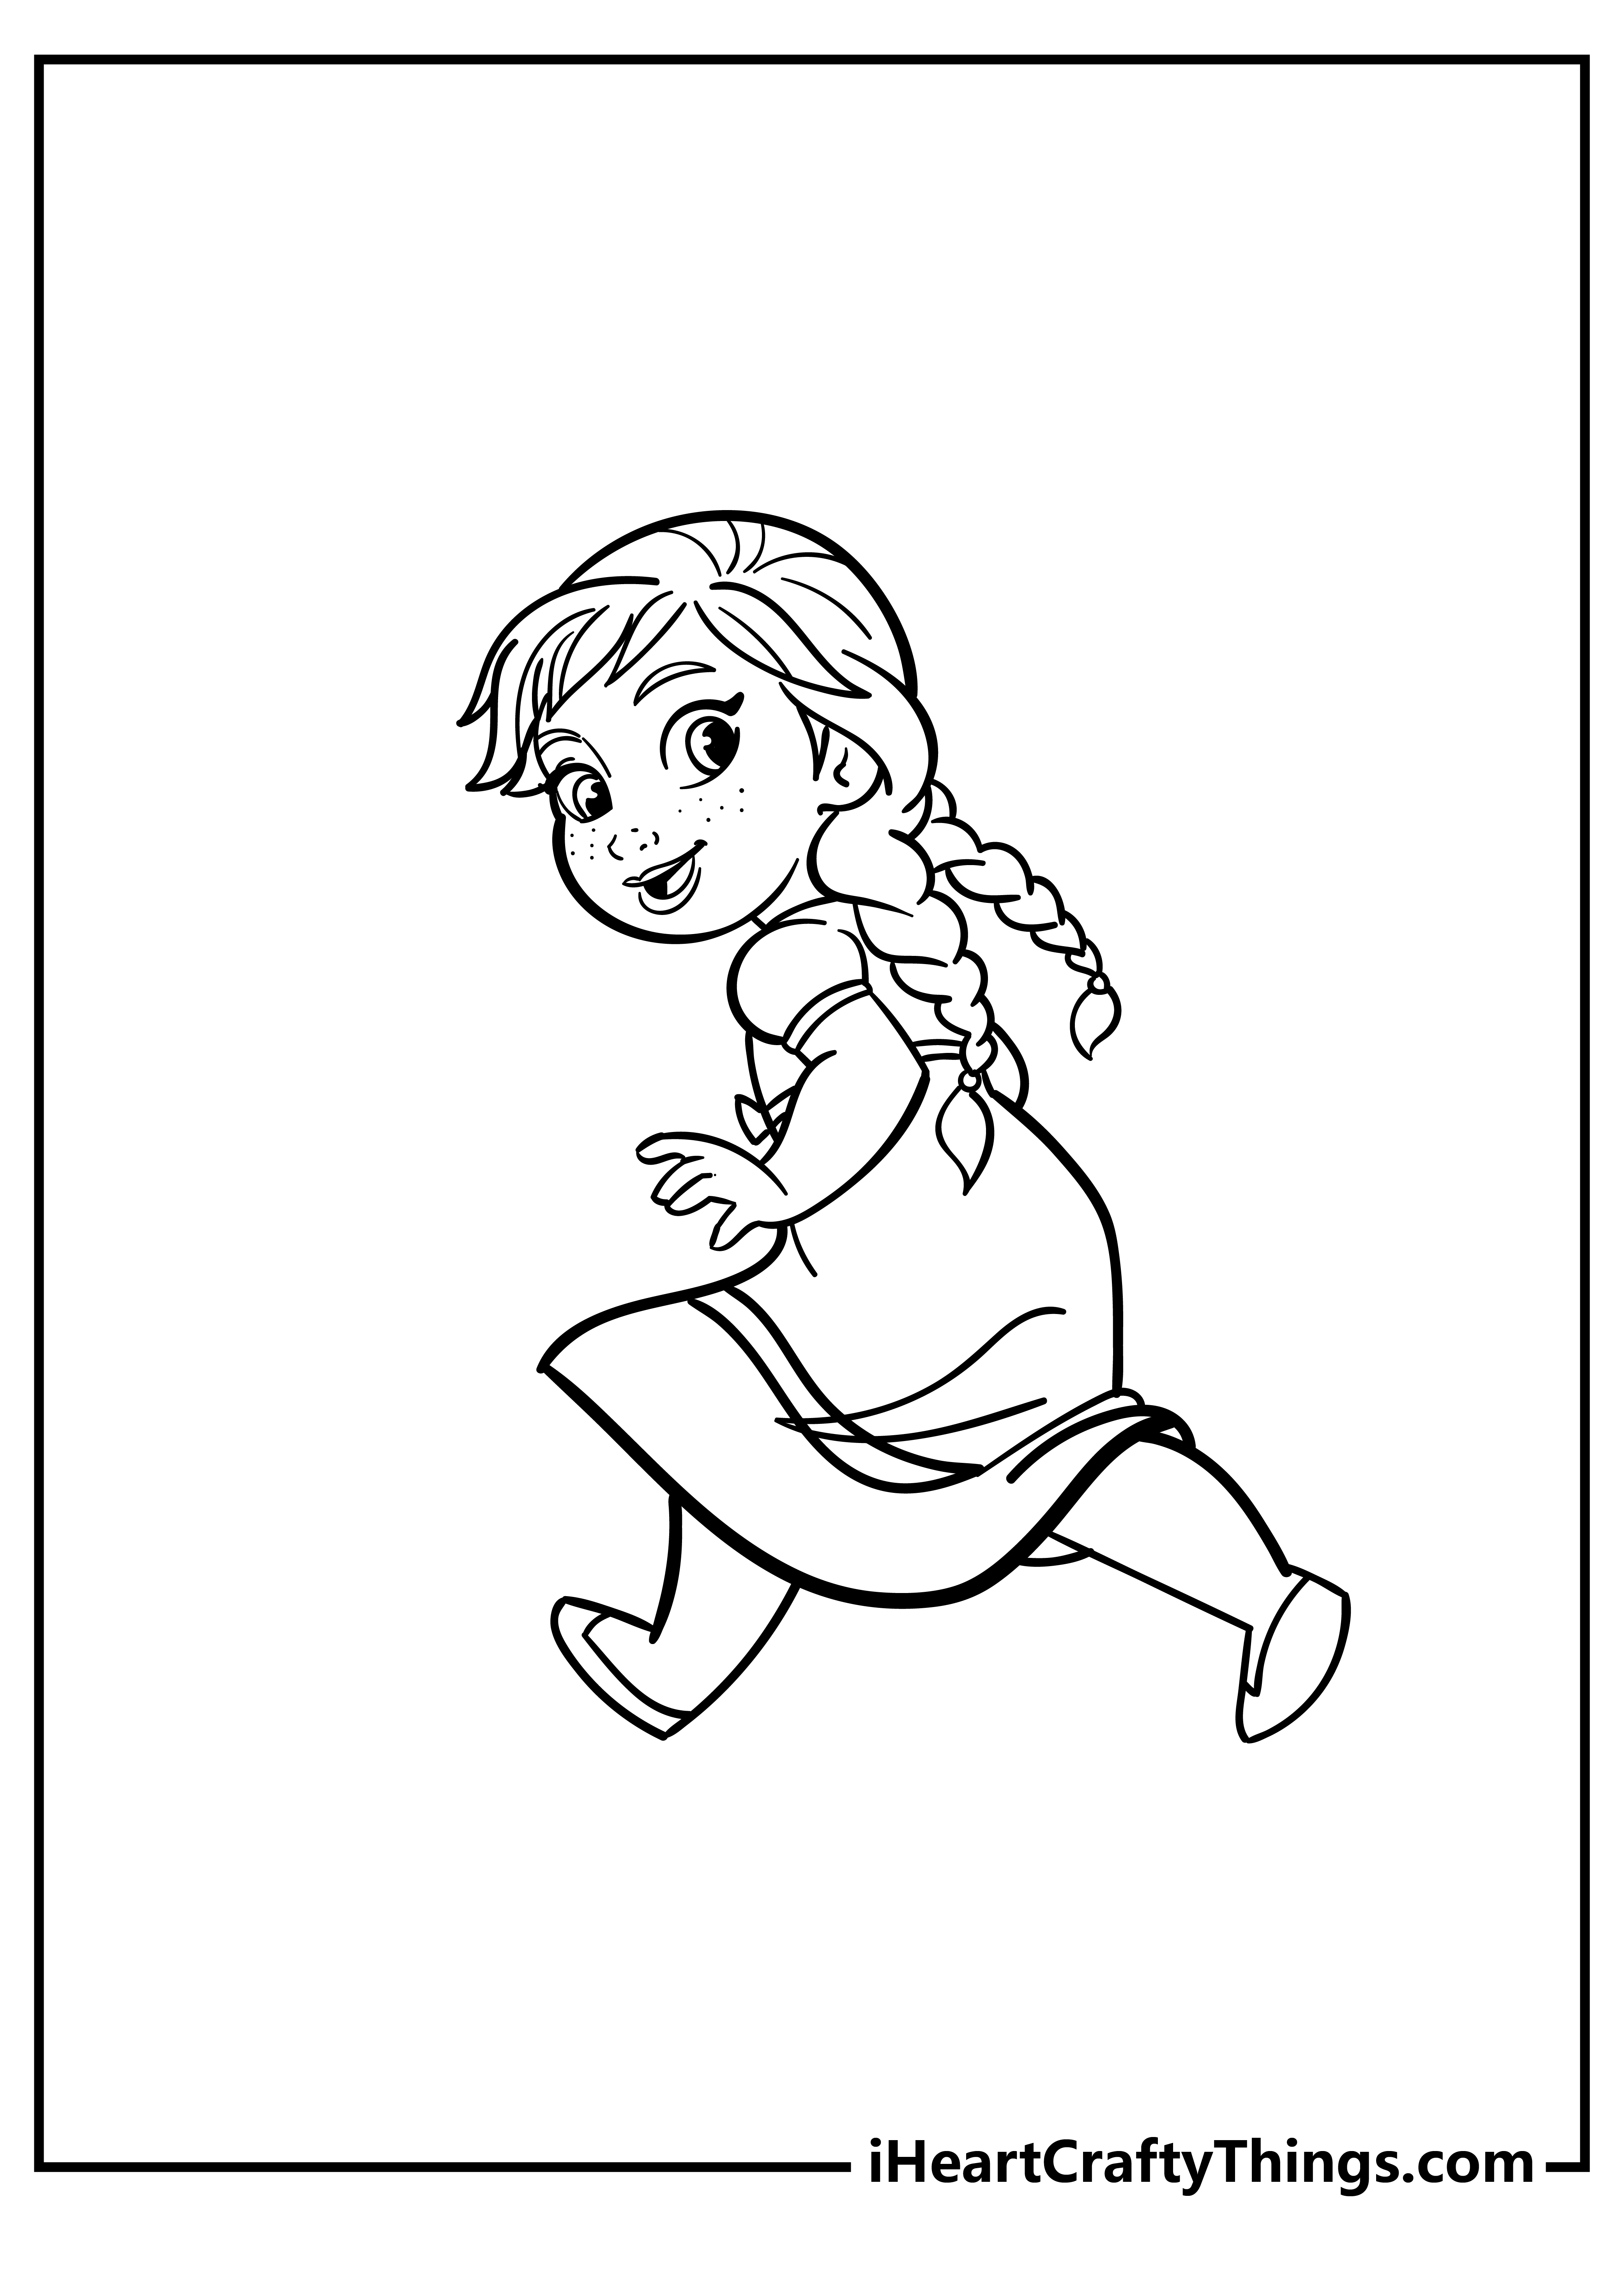 Anna Coloring Sheet for children free download